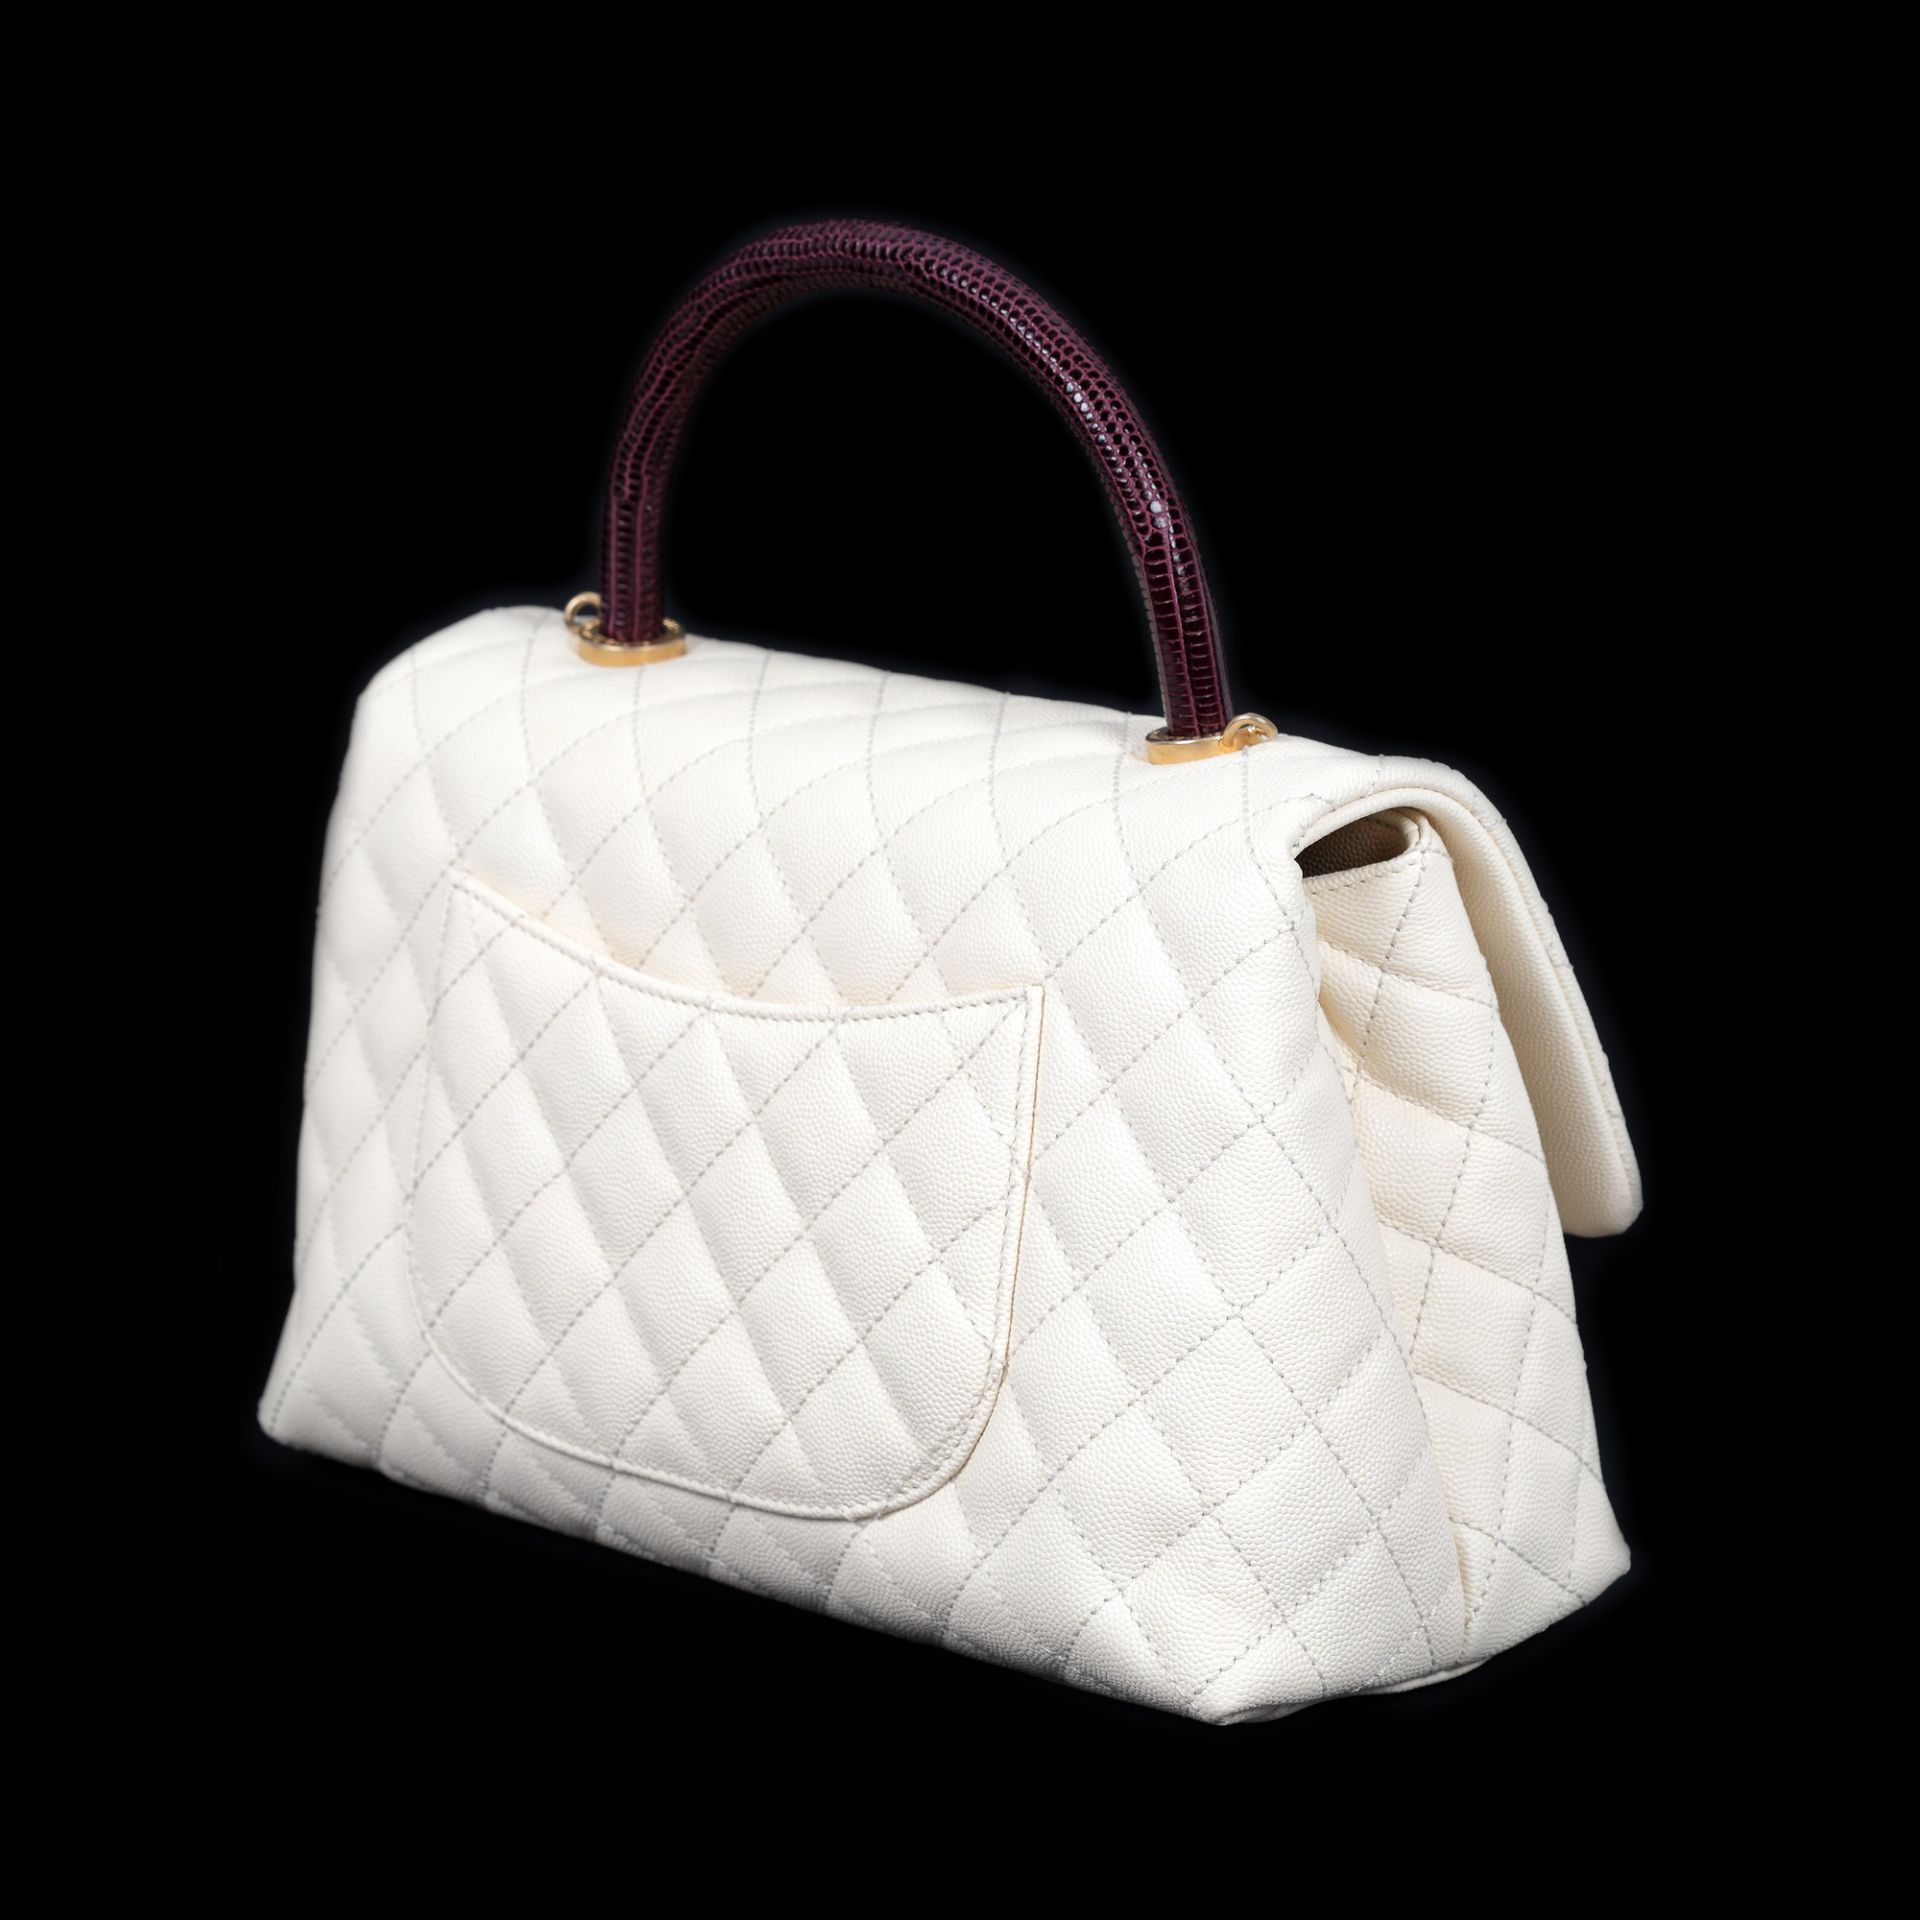 "Coco Handle Bag" - Chanel bag, quilted leather, white, lizard leather handle, burgundy - Image 9 of 11